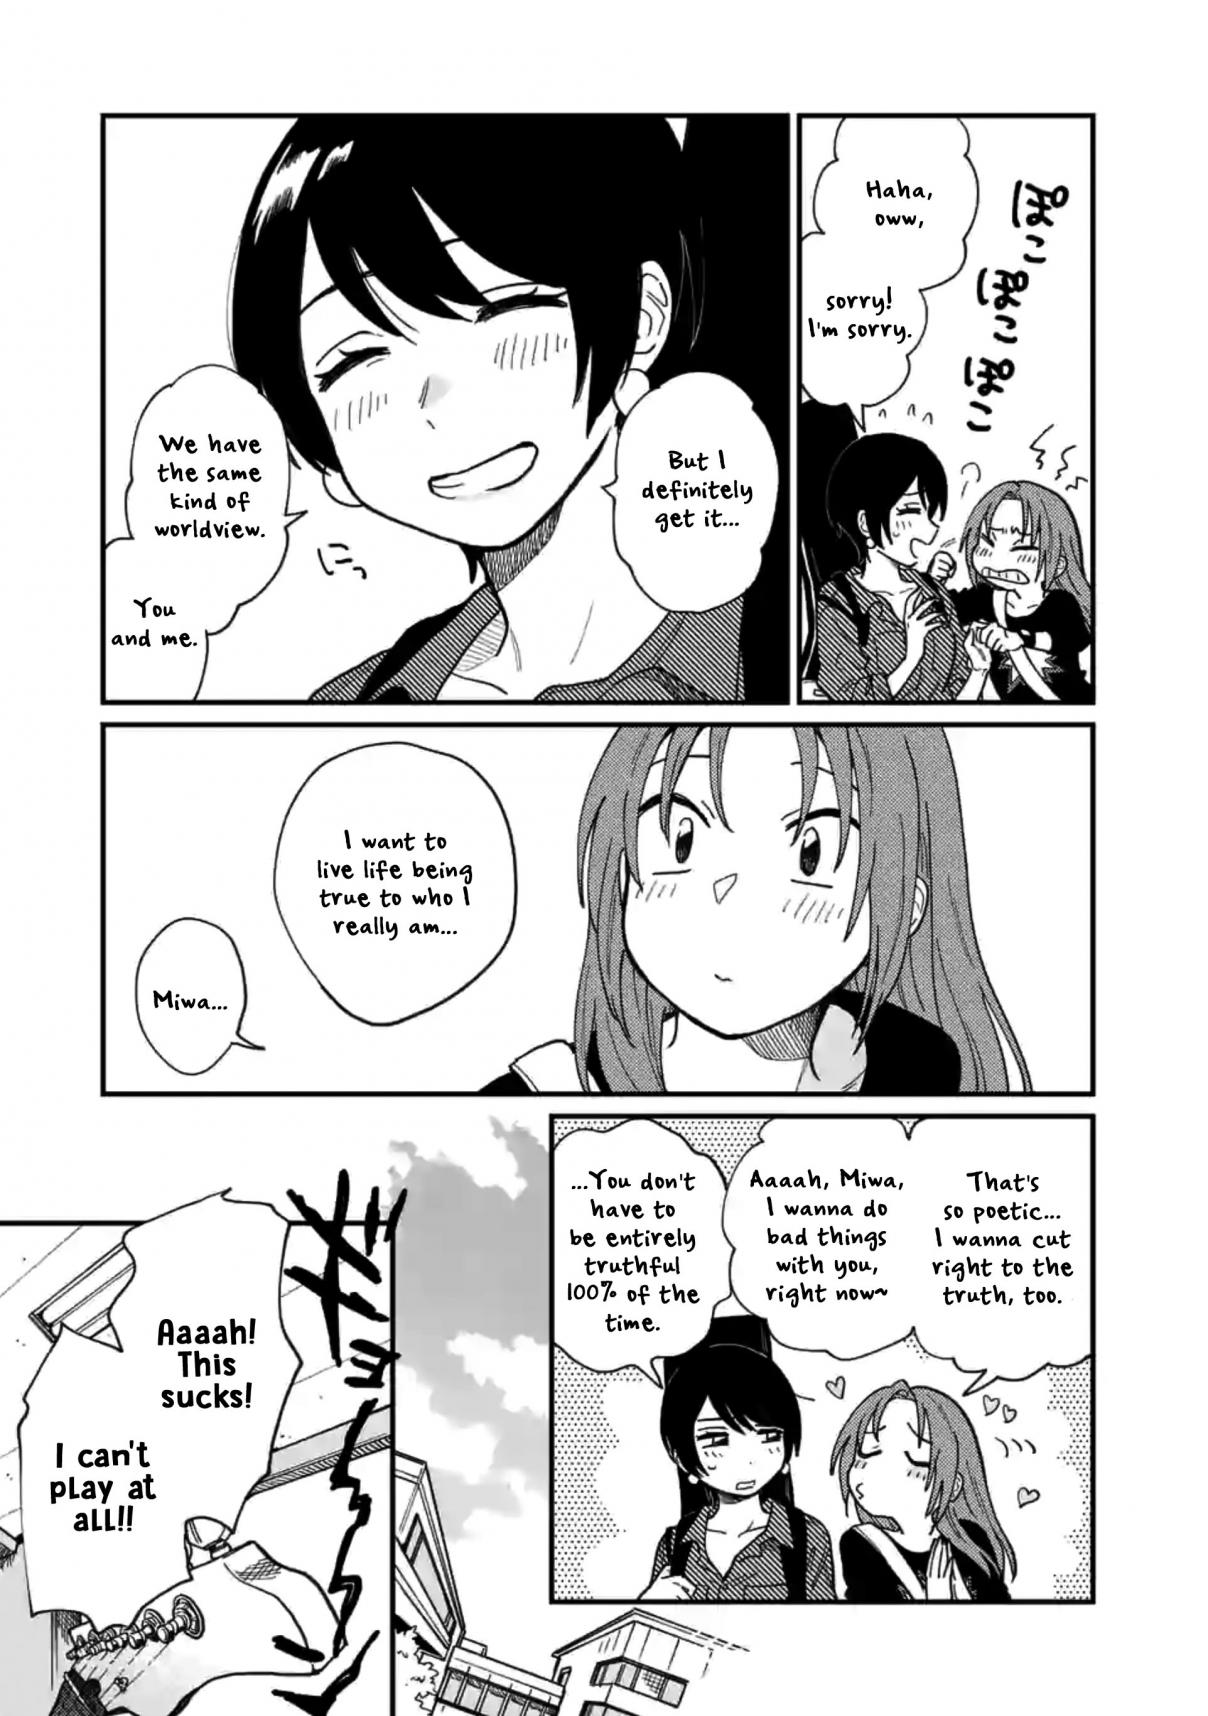 So, Do You Want To Go Out, Or? Ch. 3